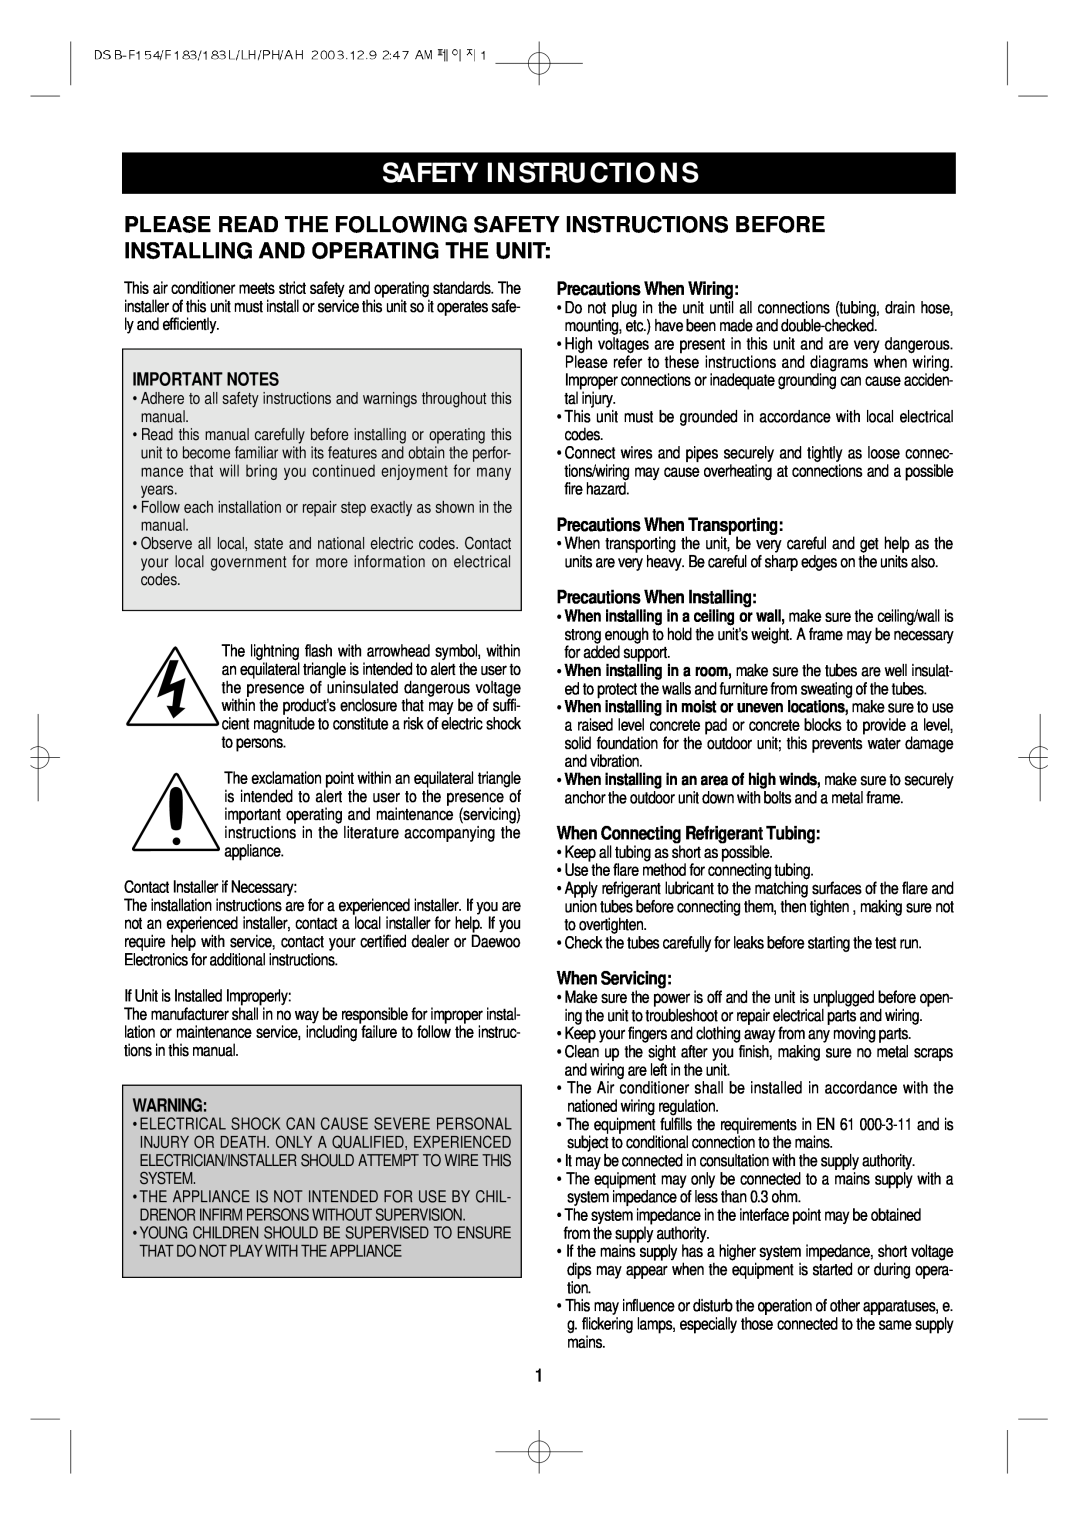 Daewoo DSB-F154LH owner manual Safety Instructions, Important Notes, Precautions When Wiring, Precautions When Transporting 